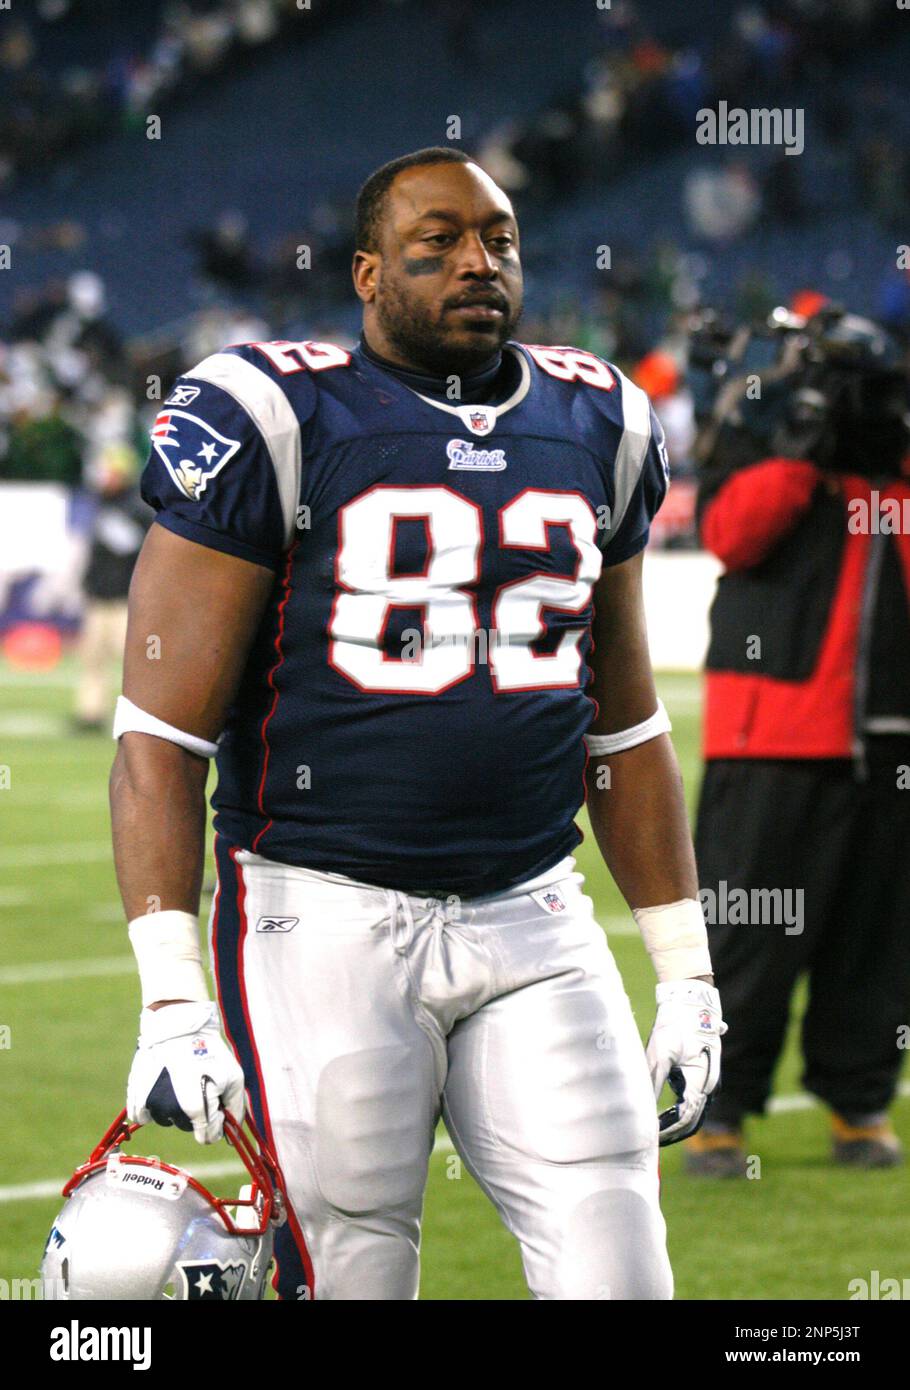 16 January 2011. Patriot Tight End Alge Crumpler (82) heads off the field following the game. The New York Jets defeated the New England Patriots 28 to 21 in an AFC Divisional Playoff game in Gillette Stadium, Foxboro, Massachusetts. (Icon Sportswire via AP Images) Stock Photo